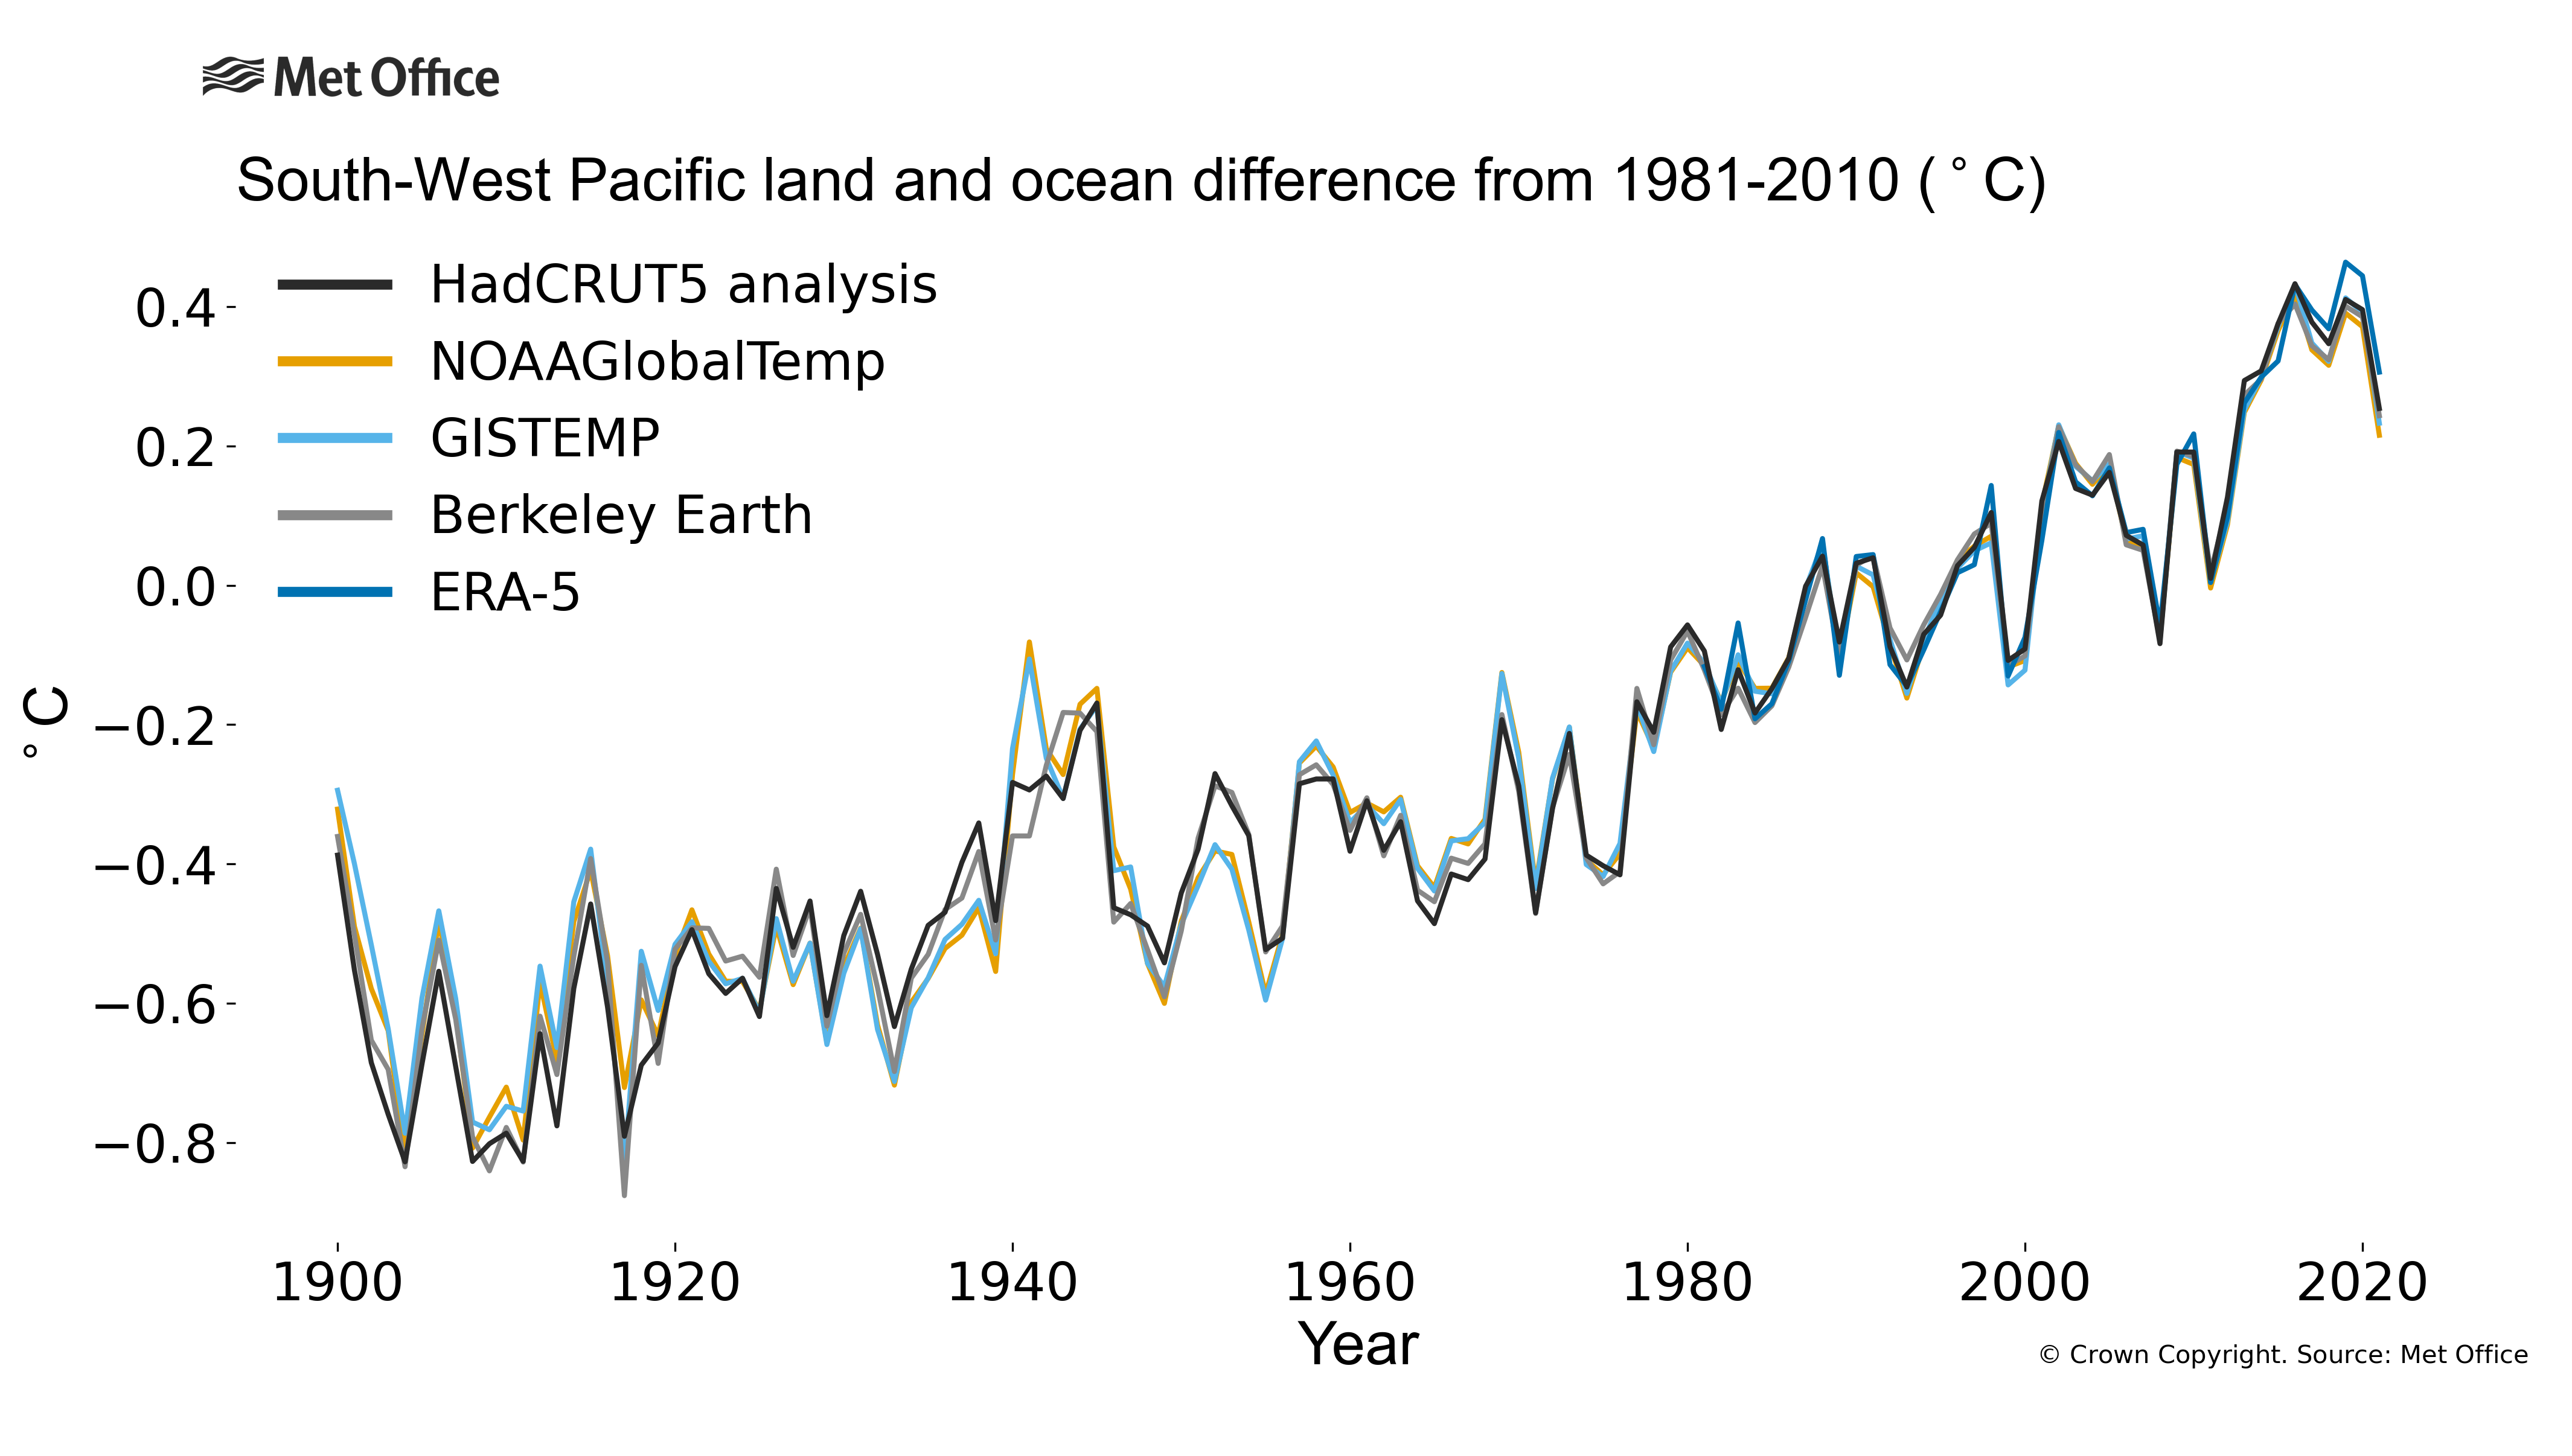 
The plot shows annual average temperature anomalies (relative to 1981-2010) for land and ocean areas in WMO RA V - South-West Pacific. Data are from six different data sets: HadCRUT5, NOAAGlobalTemp, GISTEMP, Berkeley Earth, ERA5 and JRA55.
